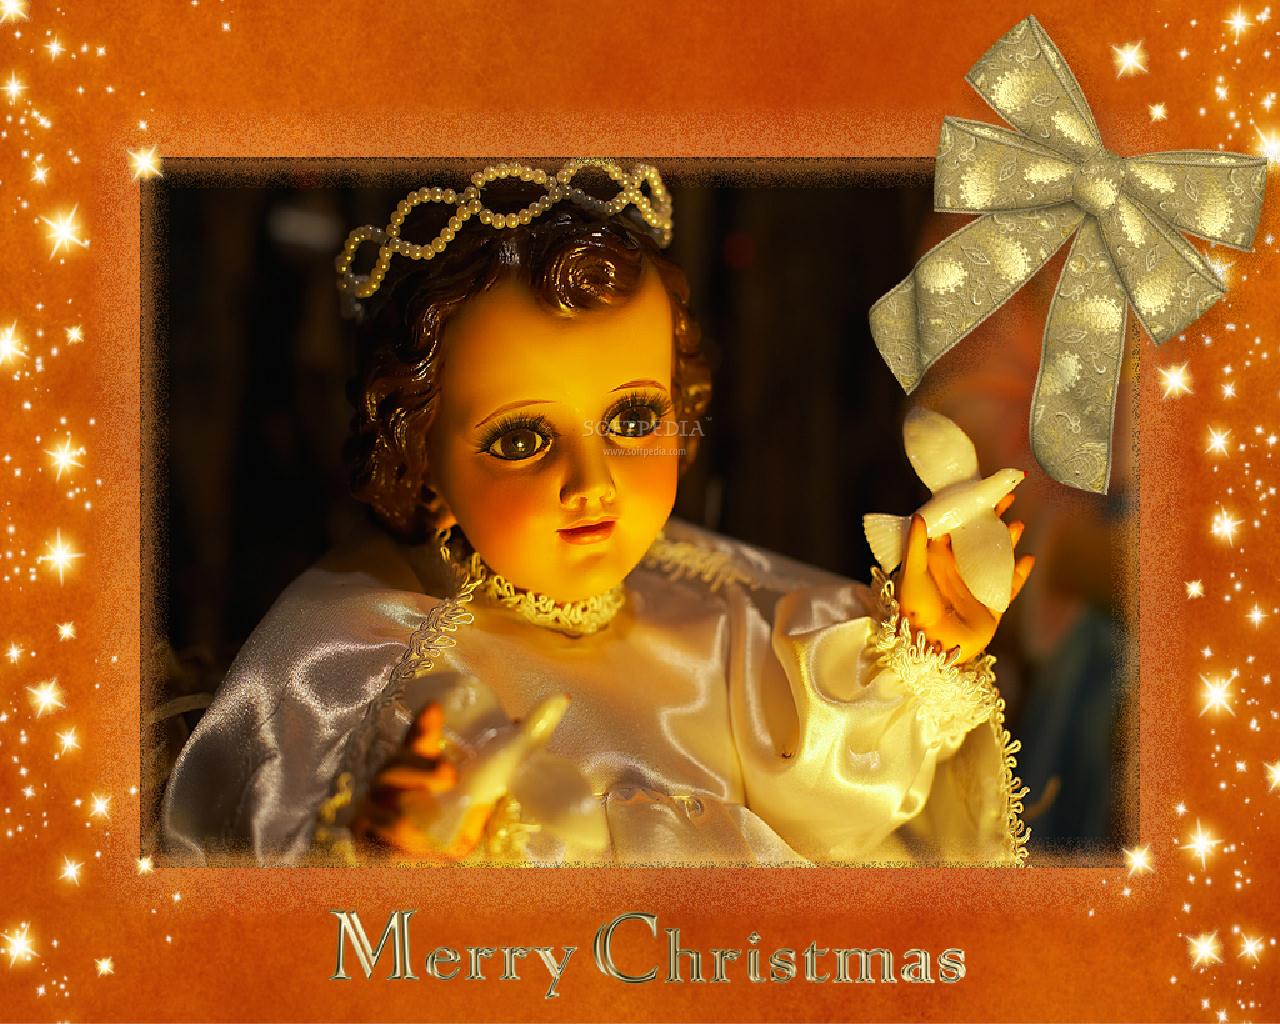 Christmas Angel Animated Wallpaper This Is The Image Displayed By